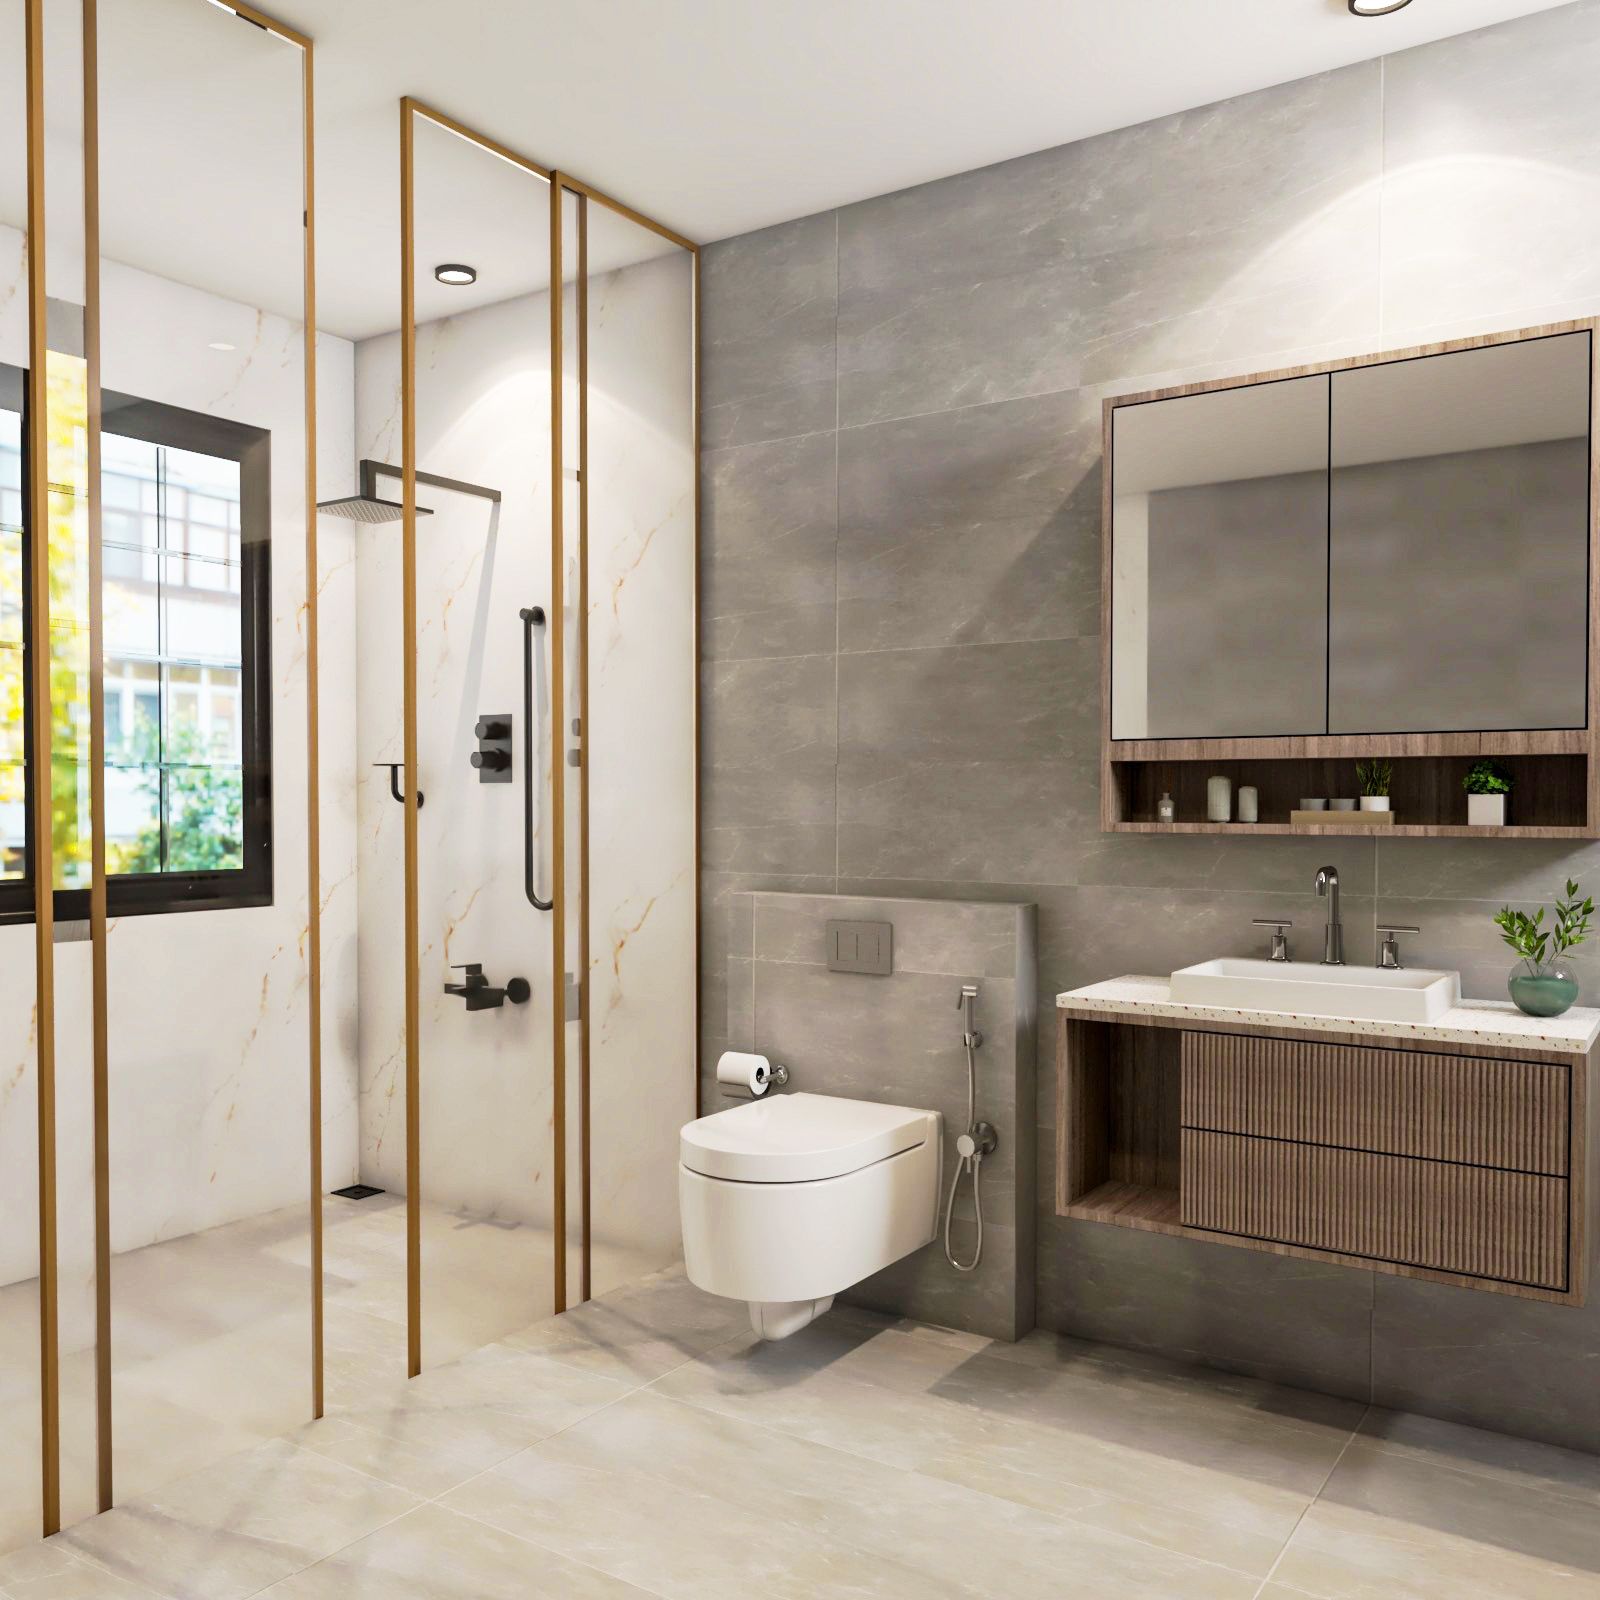 Contemporary Dual Toned Bathroom Design With Wall-Mounted Fluted Wooden Vanity Unit